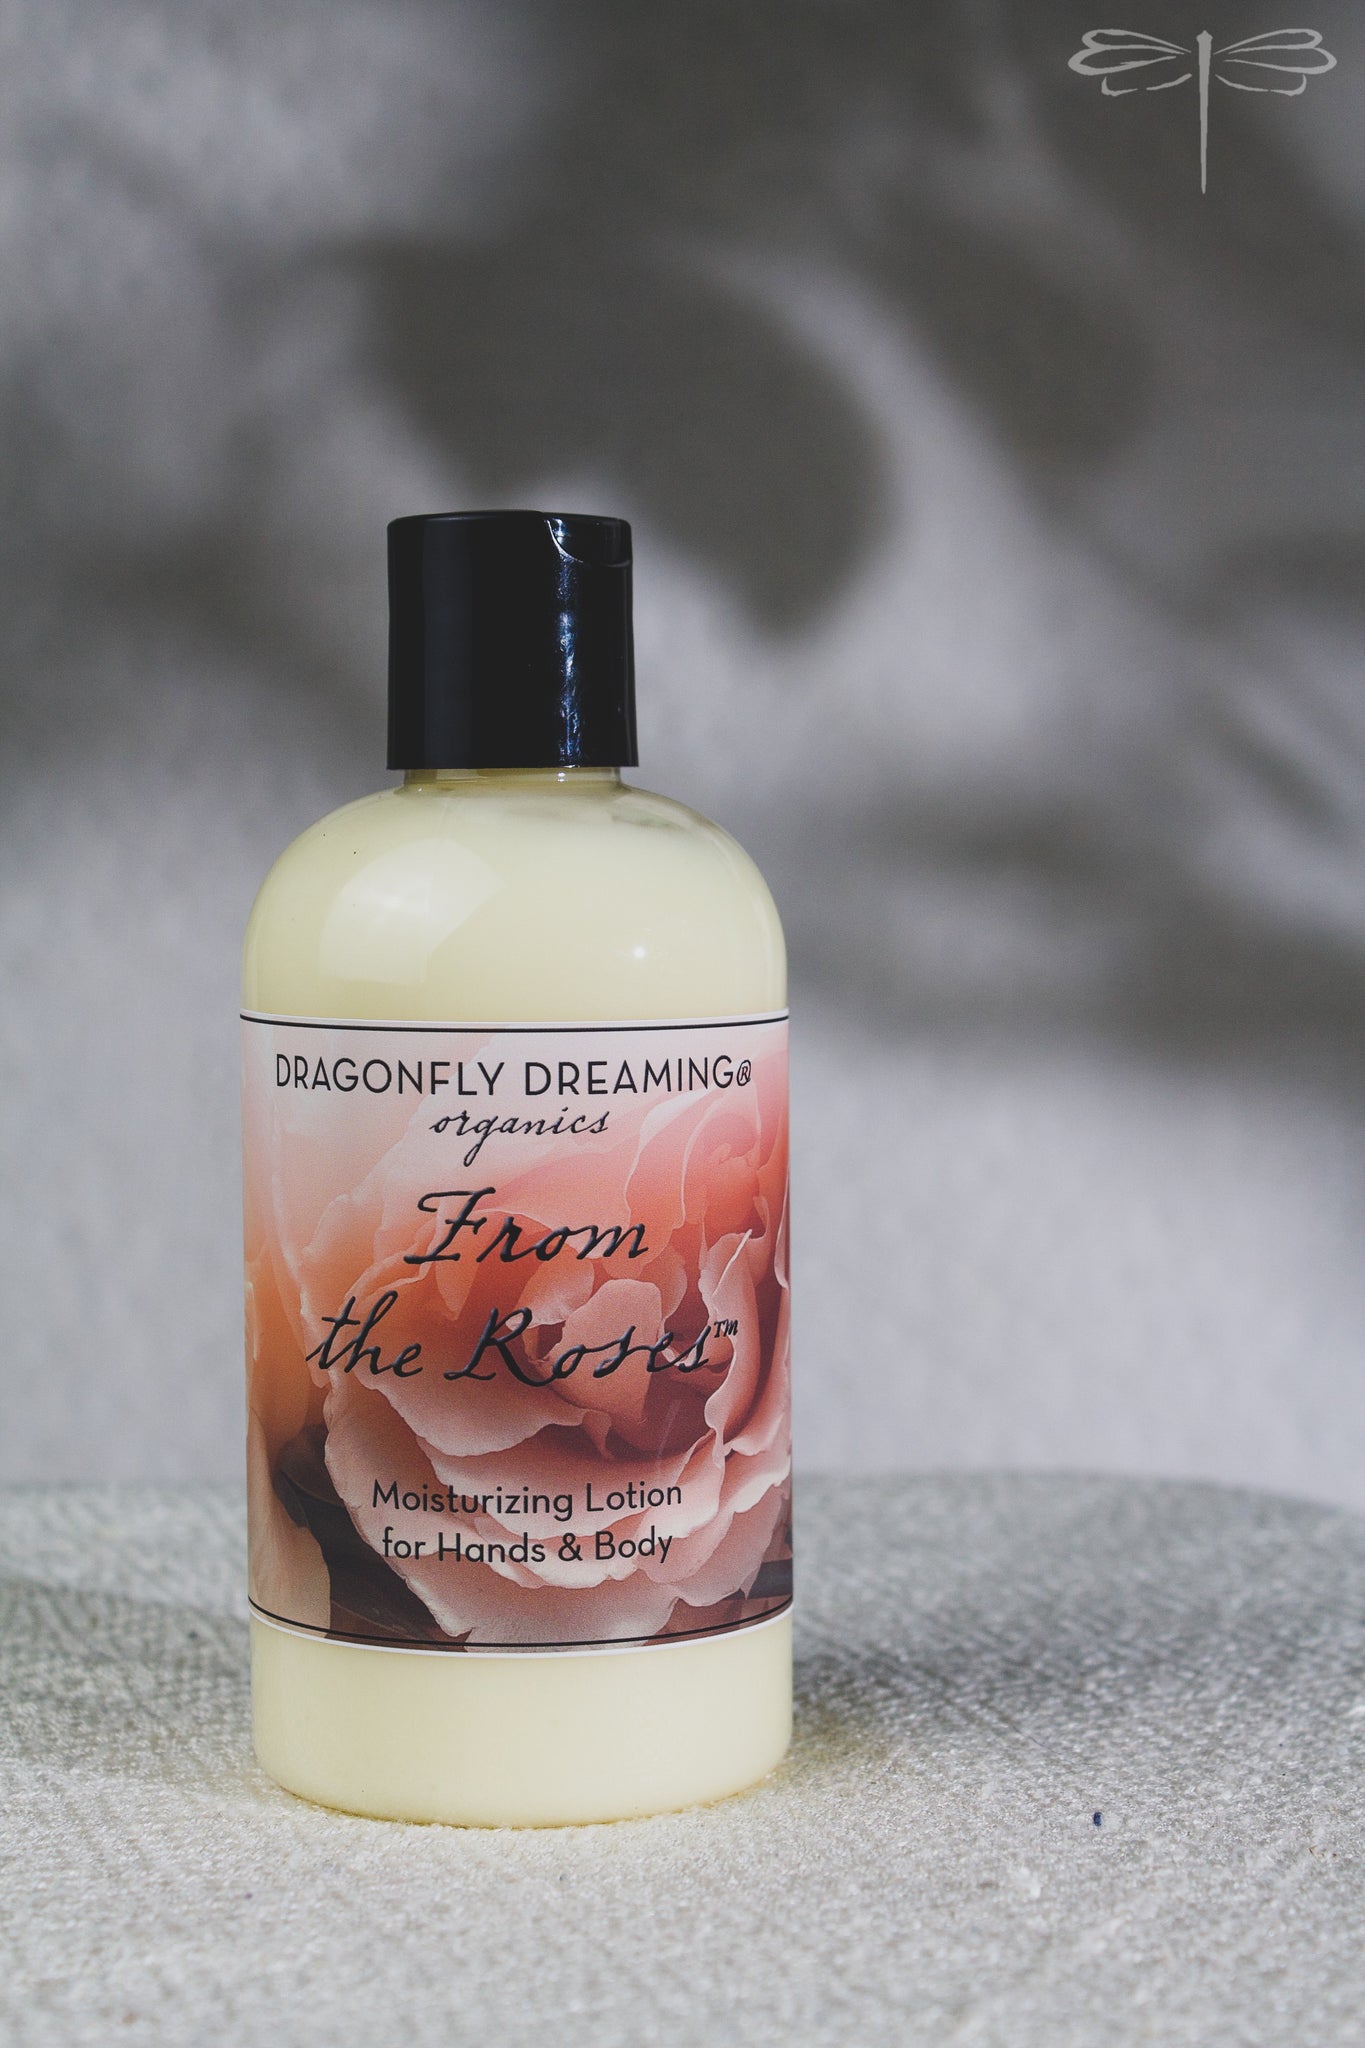 Pictured here, From the Roses Moisturizing Lotion by Dragonfly Dreaming Organics